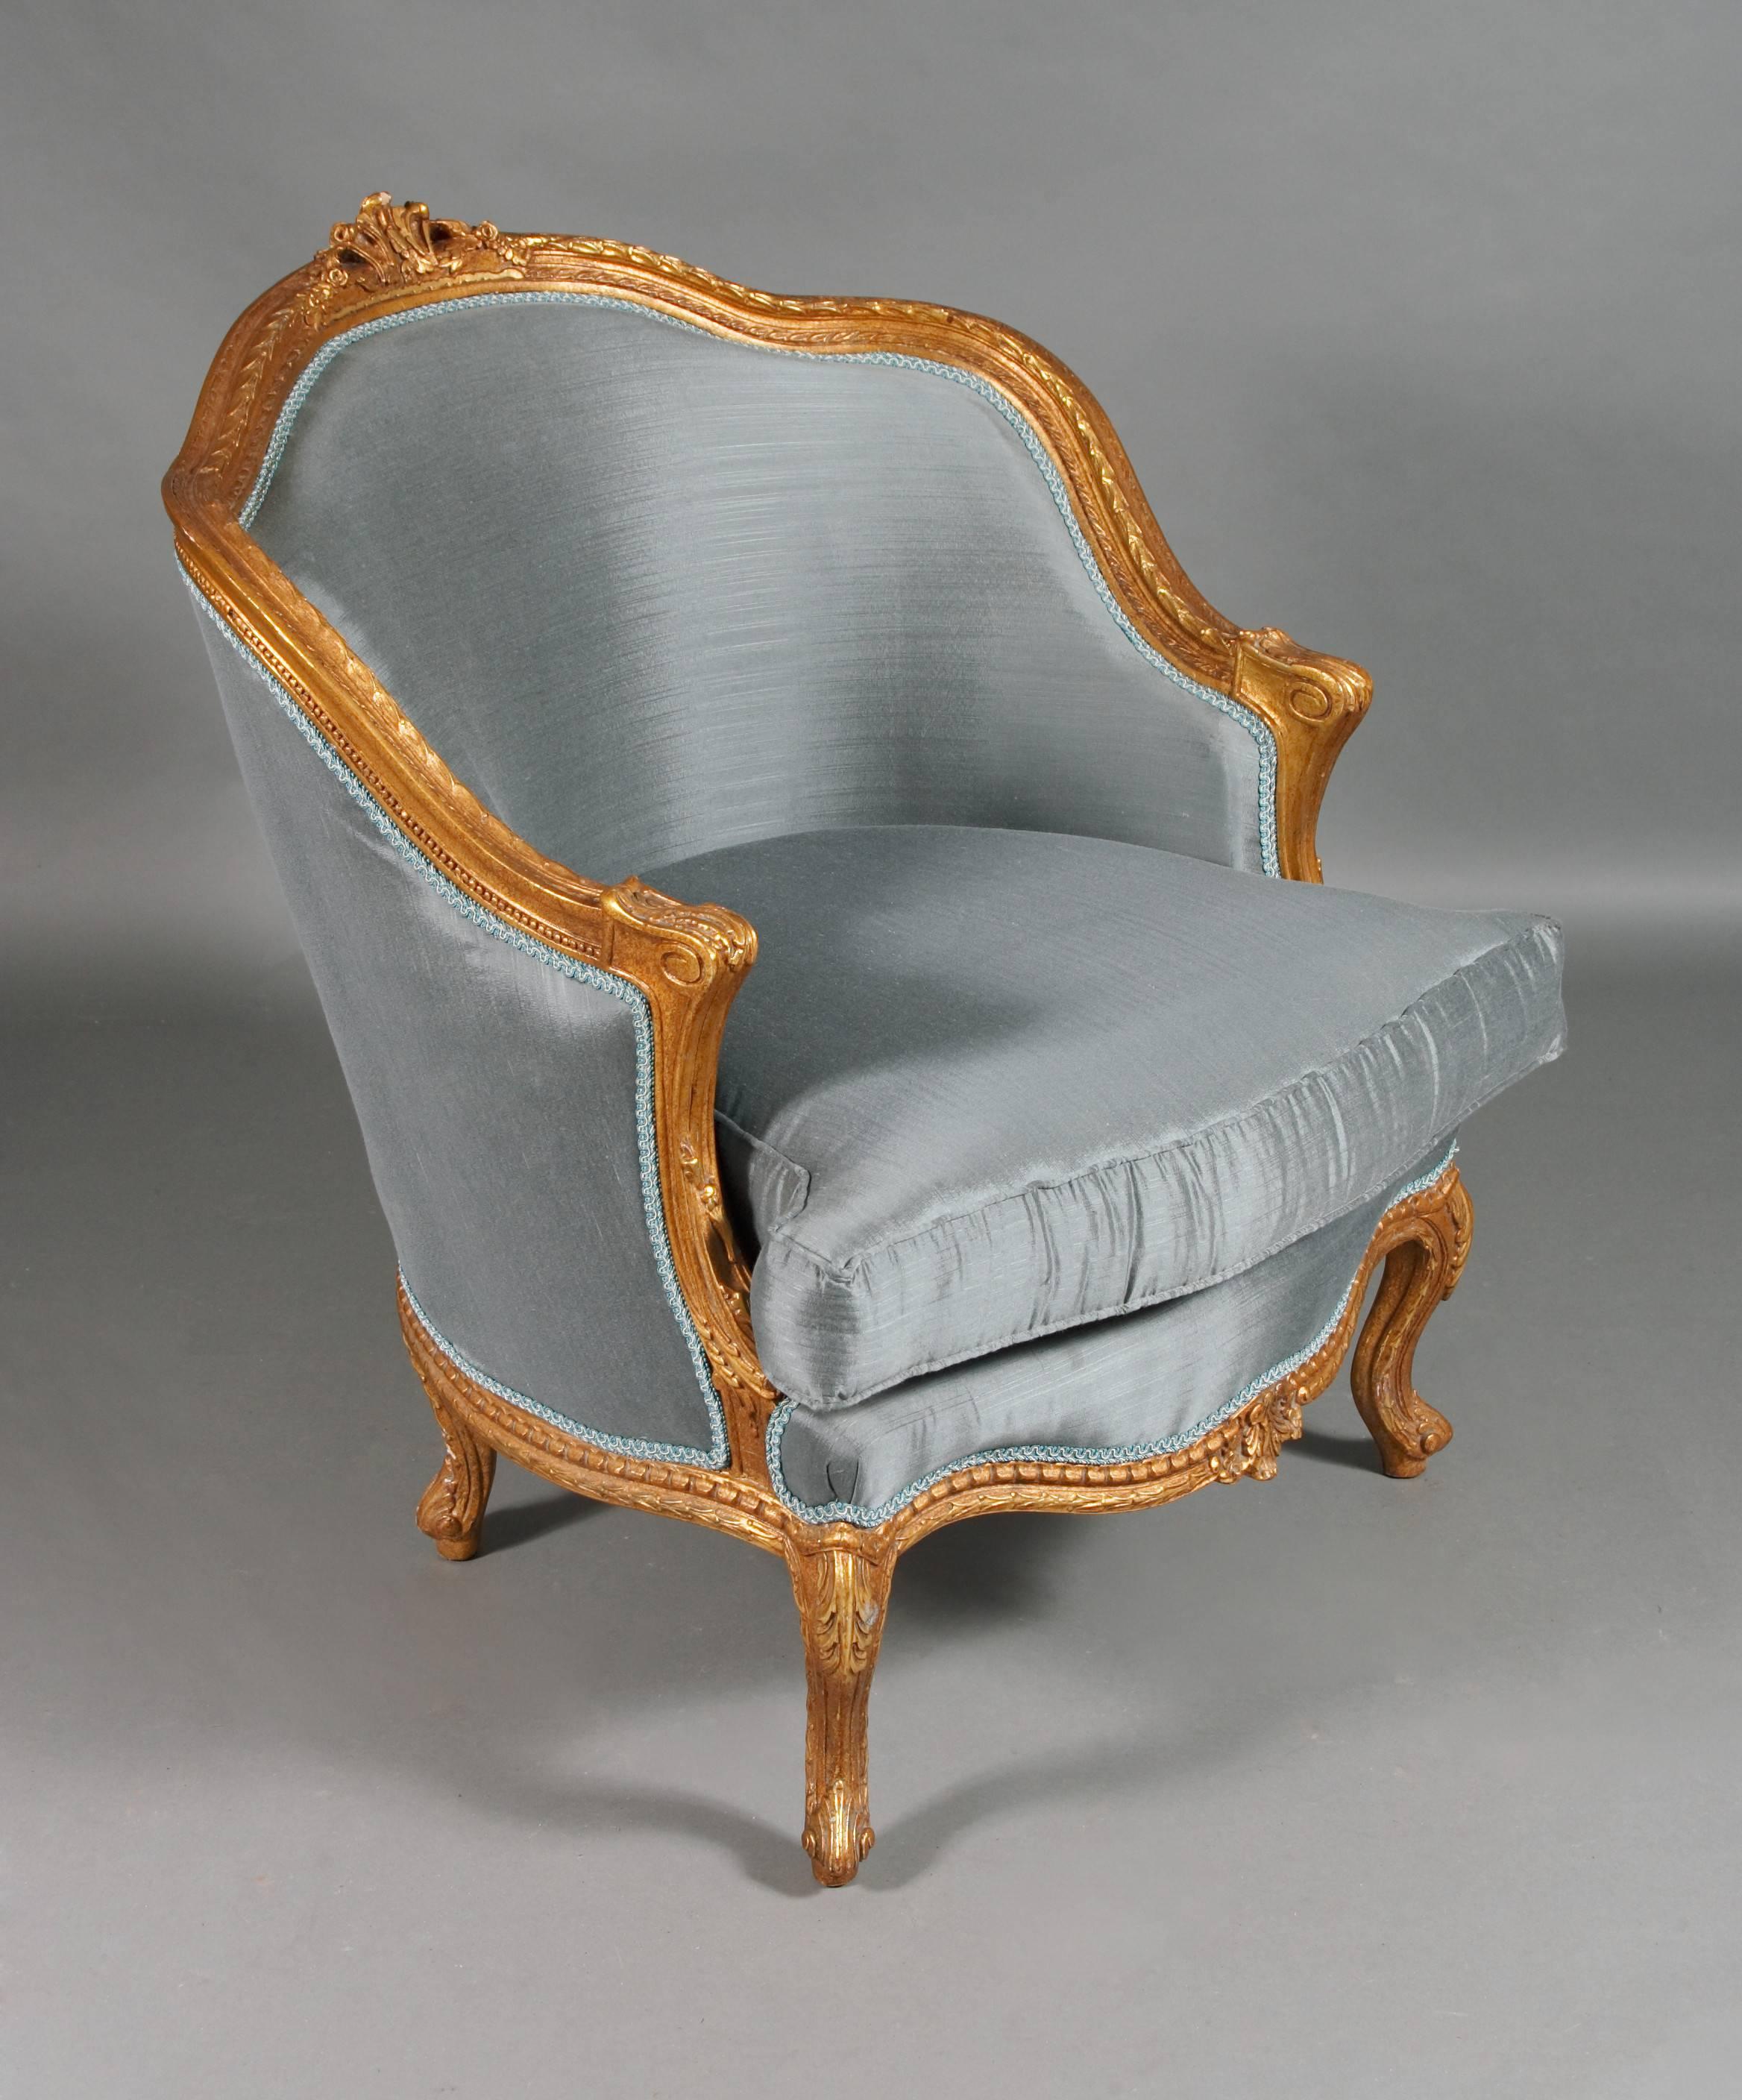 Solid beech wood, carved, colored and gilded. Semi-circular ascending backrest frame with rocaille crowning. Passive, carved frame. Slightly bent frame on curly legs. The seat and backrest are finished with a Classic upholstery. The fabric cover is